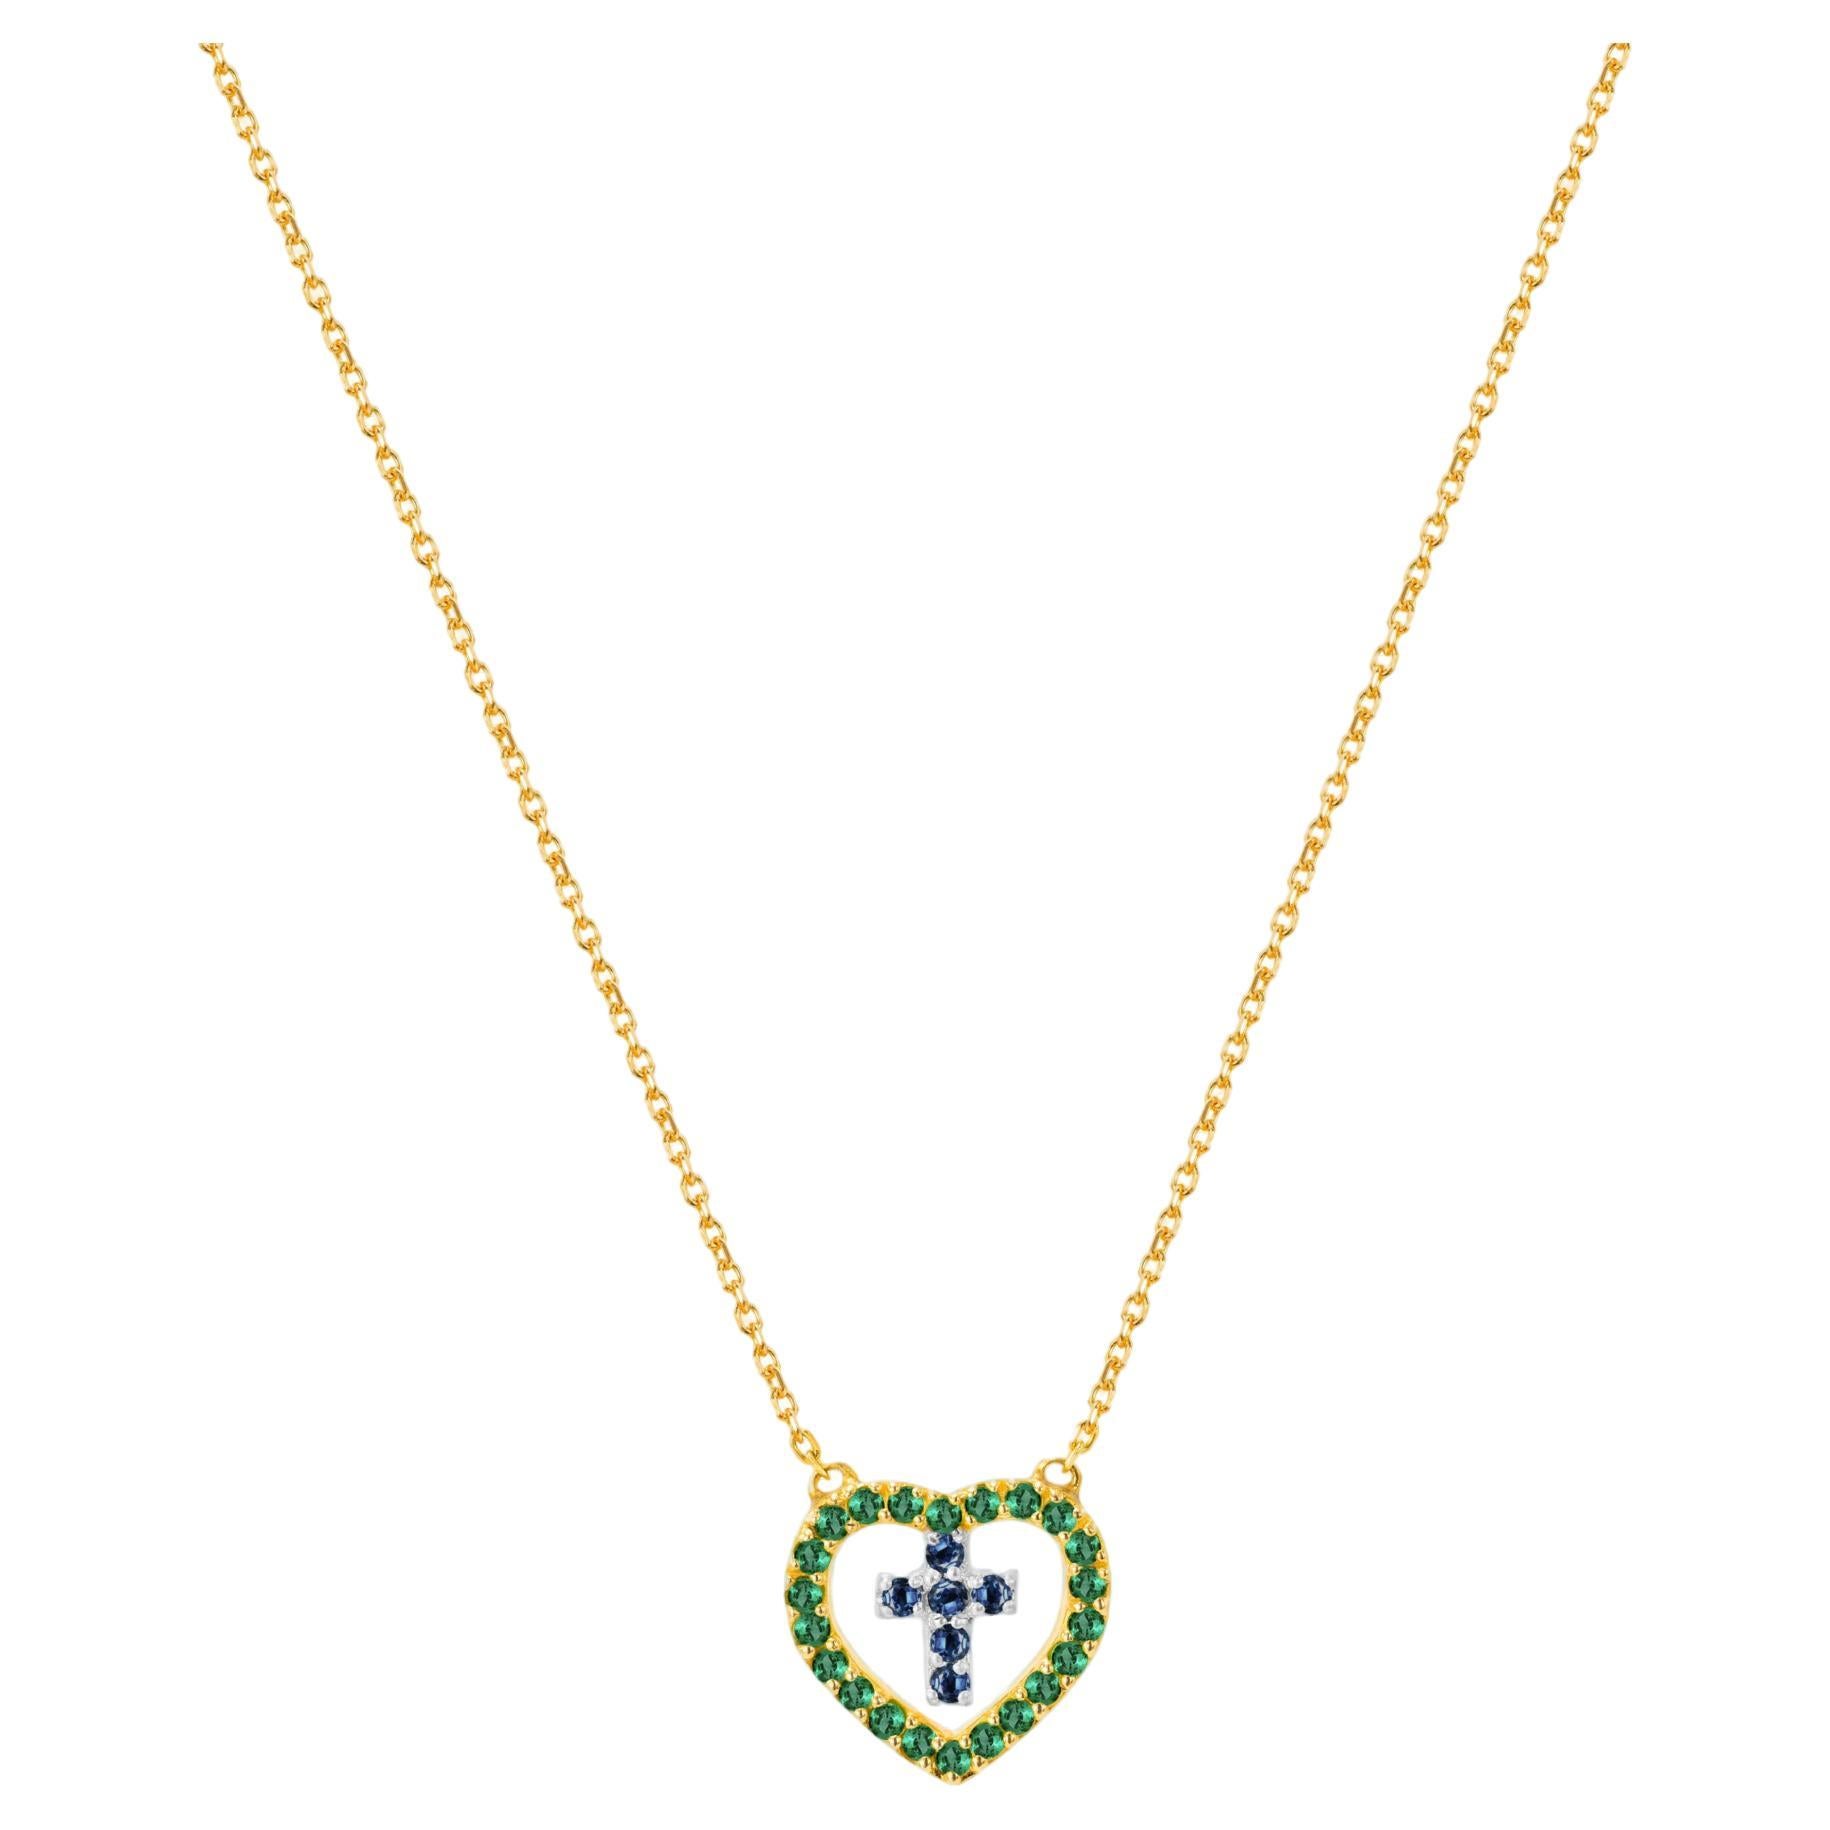 18k Gold Genuine Emerald and Blue Sapphire Necklace Cross in Heart Necklace